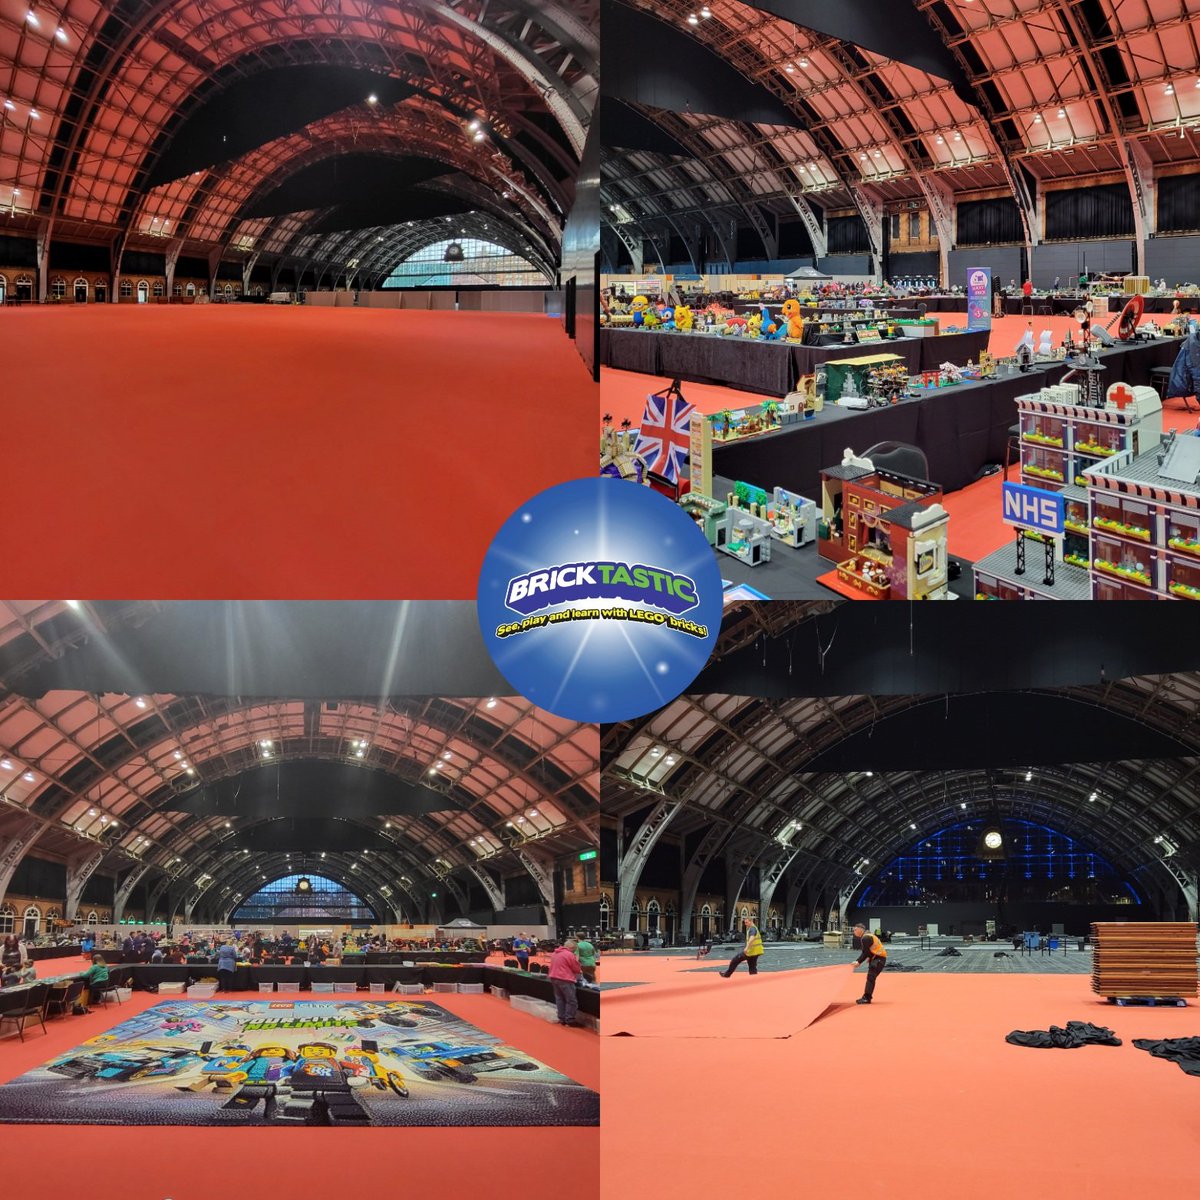 We are still not over this weekend. HUGE thanks to all the team at our venue @mcr_central. The way they turn spaces around and cover every detail is just magic to see. We can't wait to be in you again next year! #Bricktastic #Manchester #ManchesterCentral